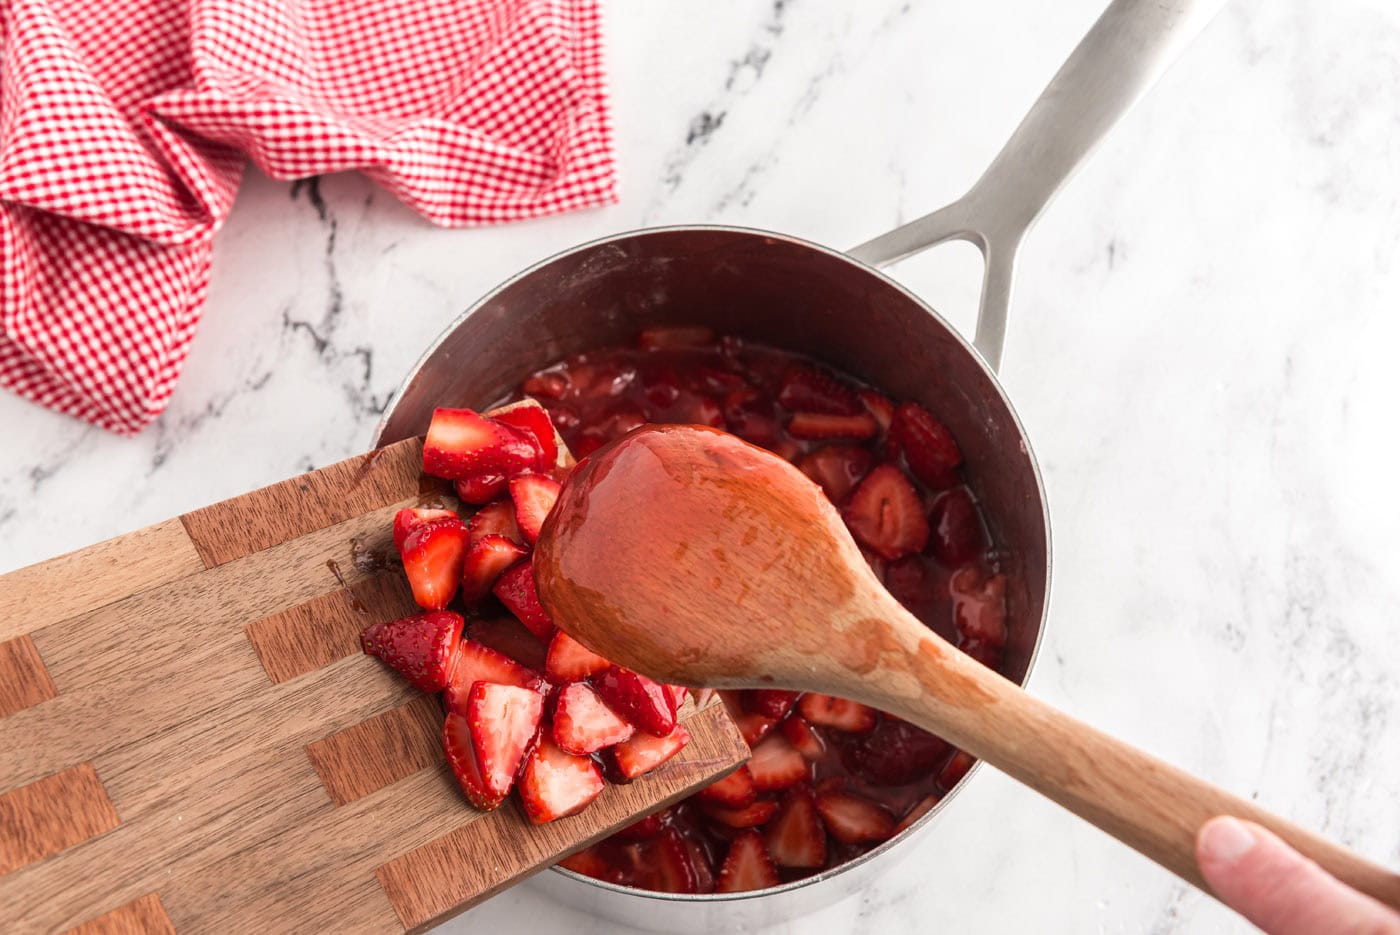 adding a quart of strawberries to homemade strawberry sauce in a saucepan